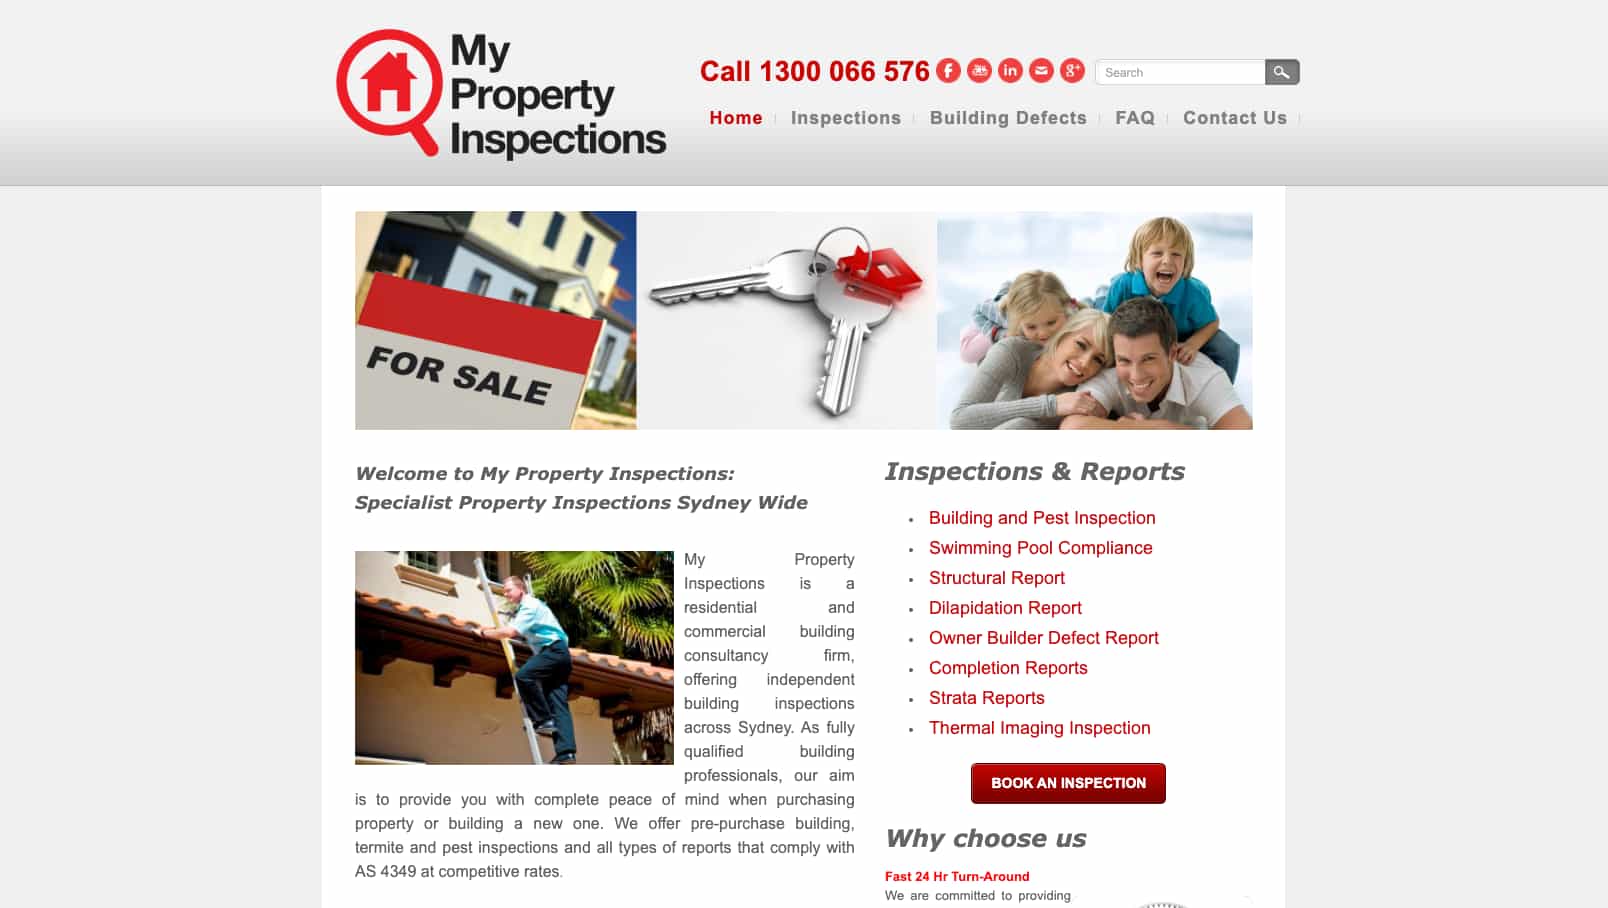 My Property Inspections